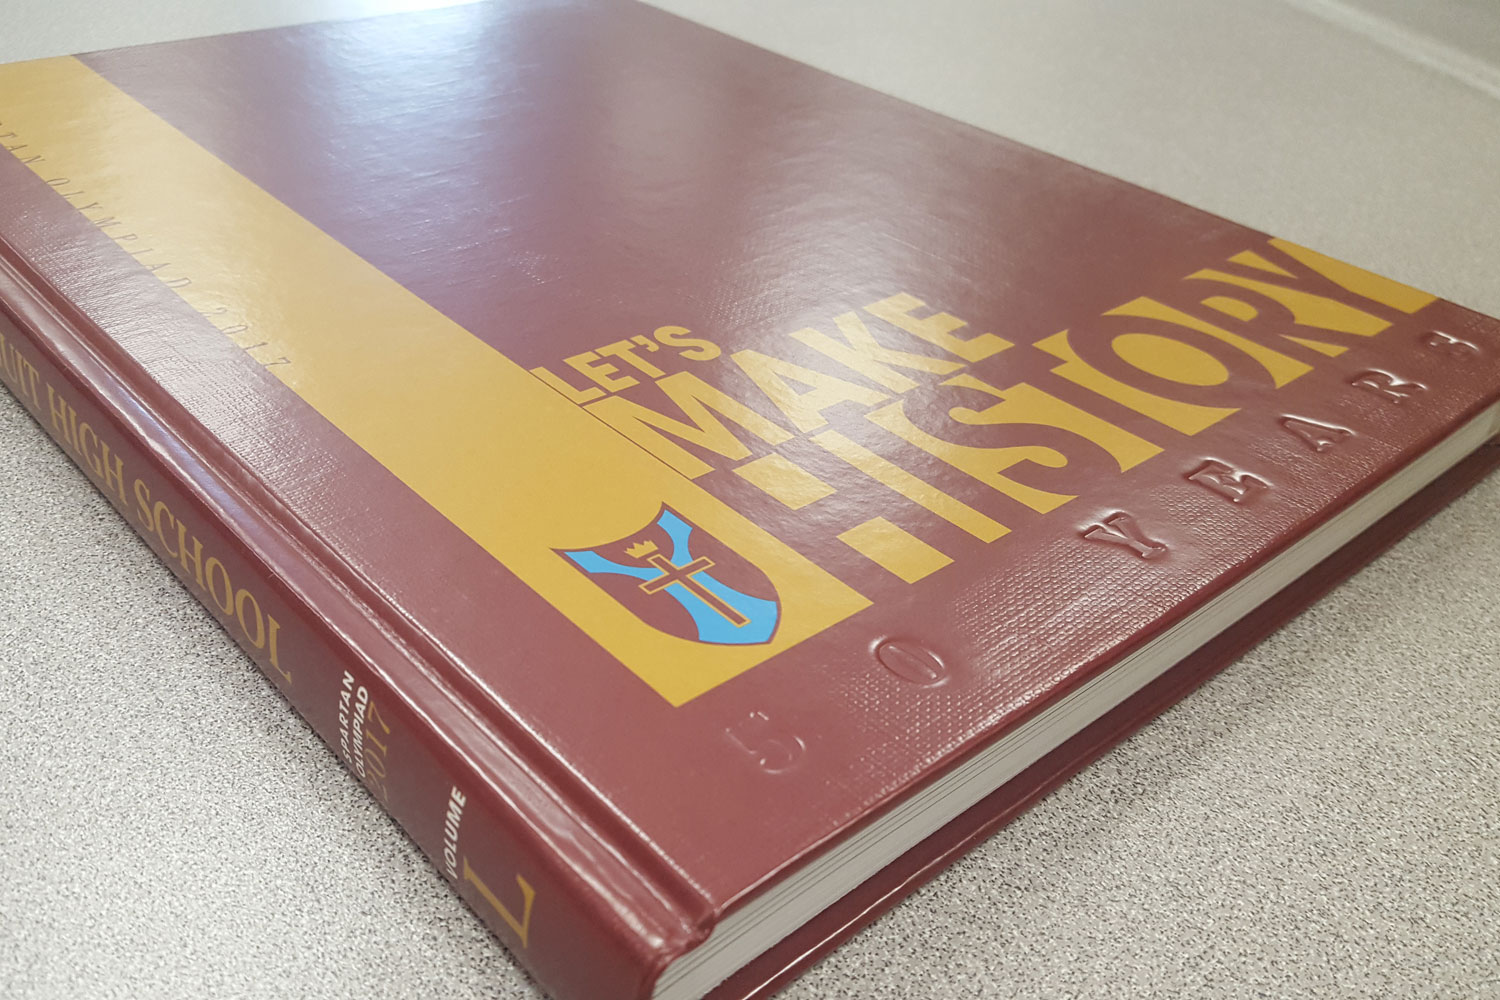 Members of the Class of 2017 can pick up their yearbook in the main office. The yearbook staff will distribute all of the rest on the first day of school Aug. 17.